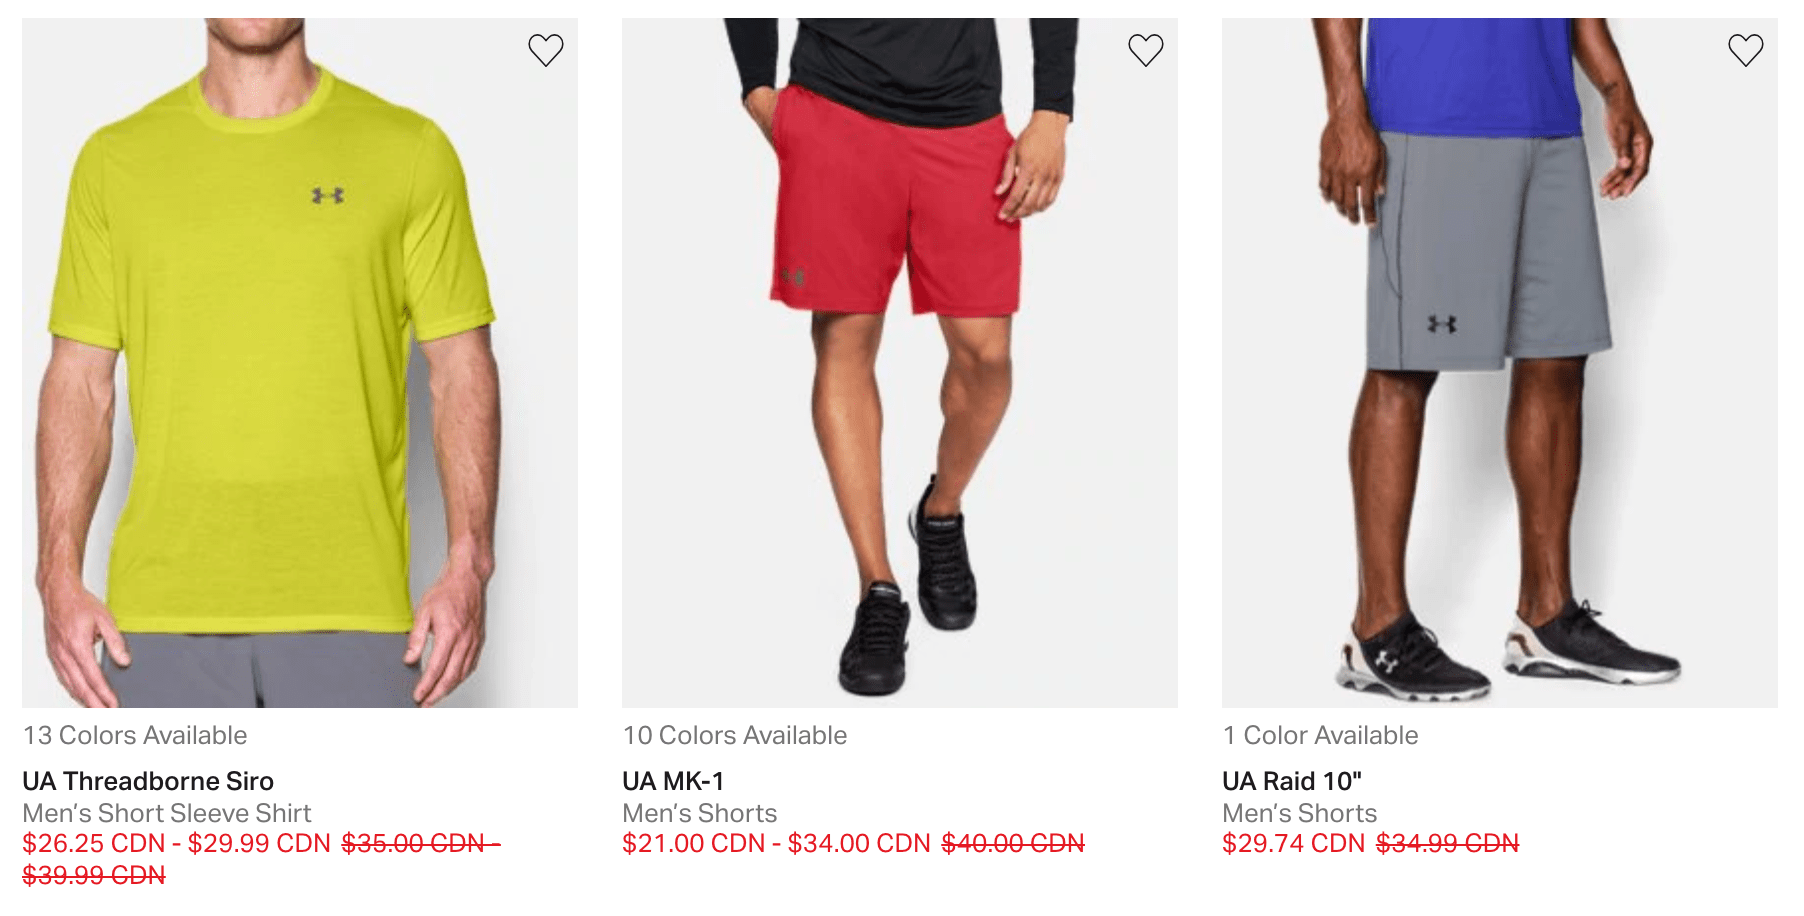 Under Armour Canada Semi Annual Event Save Up To 40 Off Outlet Canadian Freebies Coupons